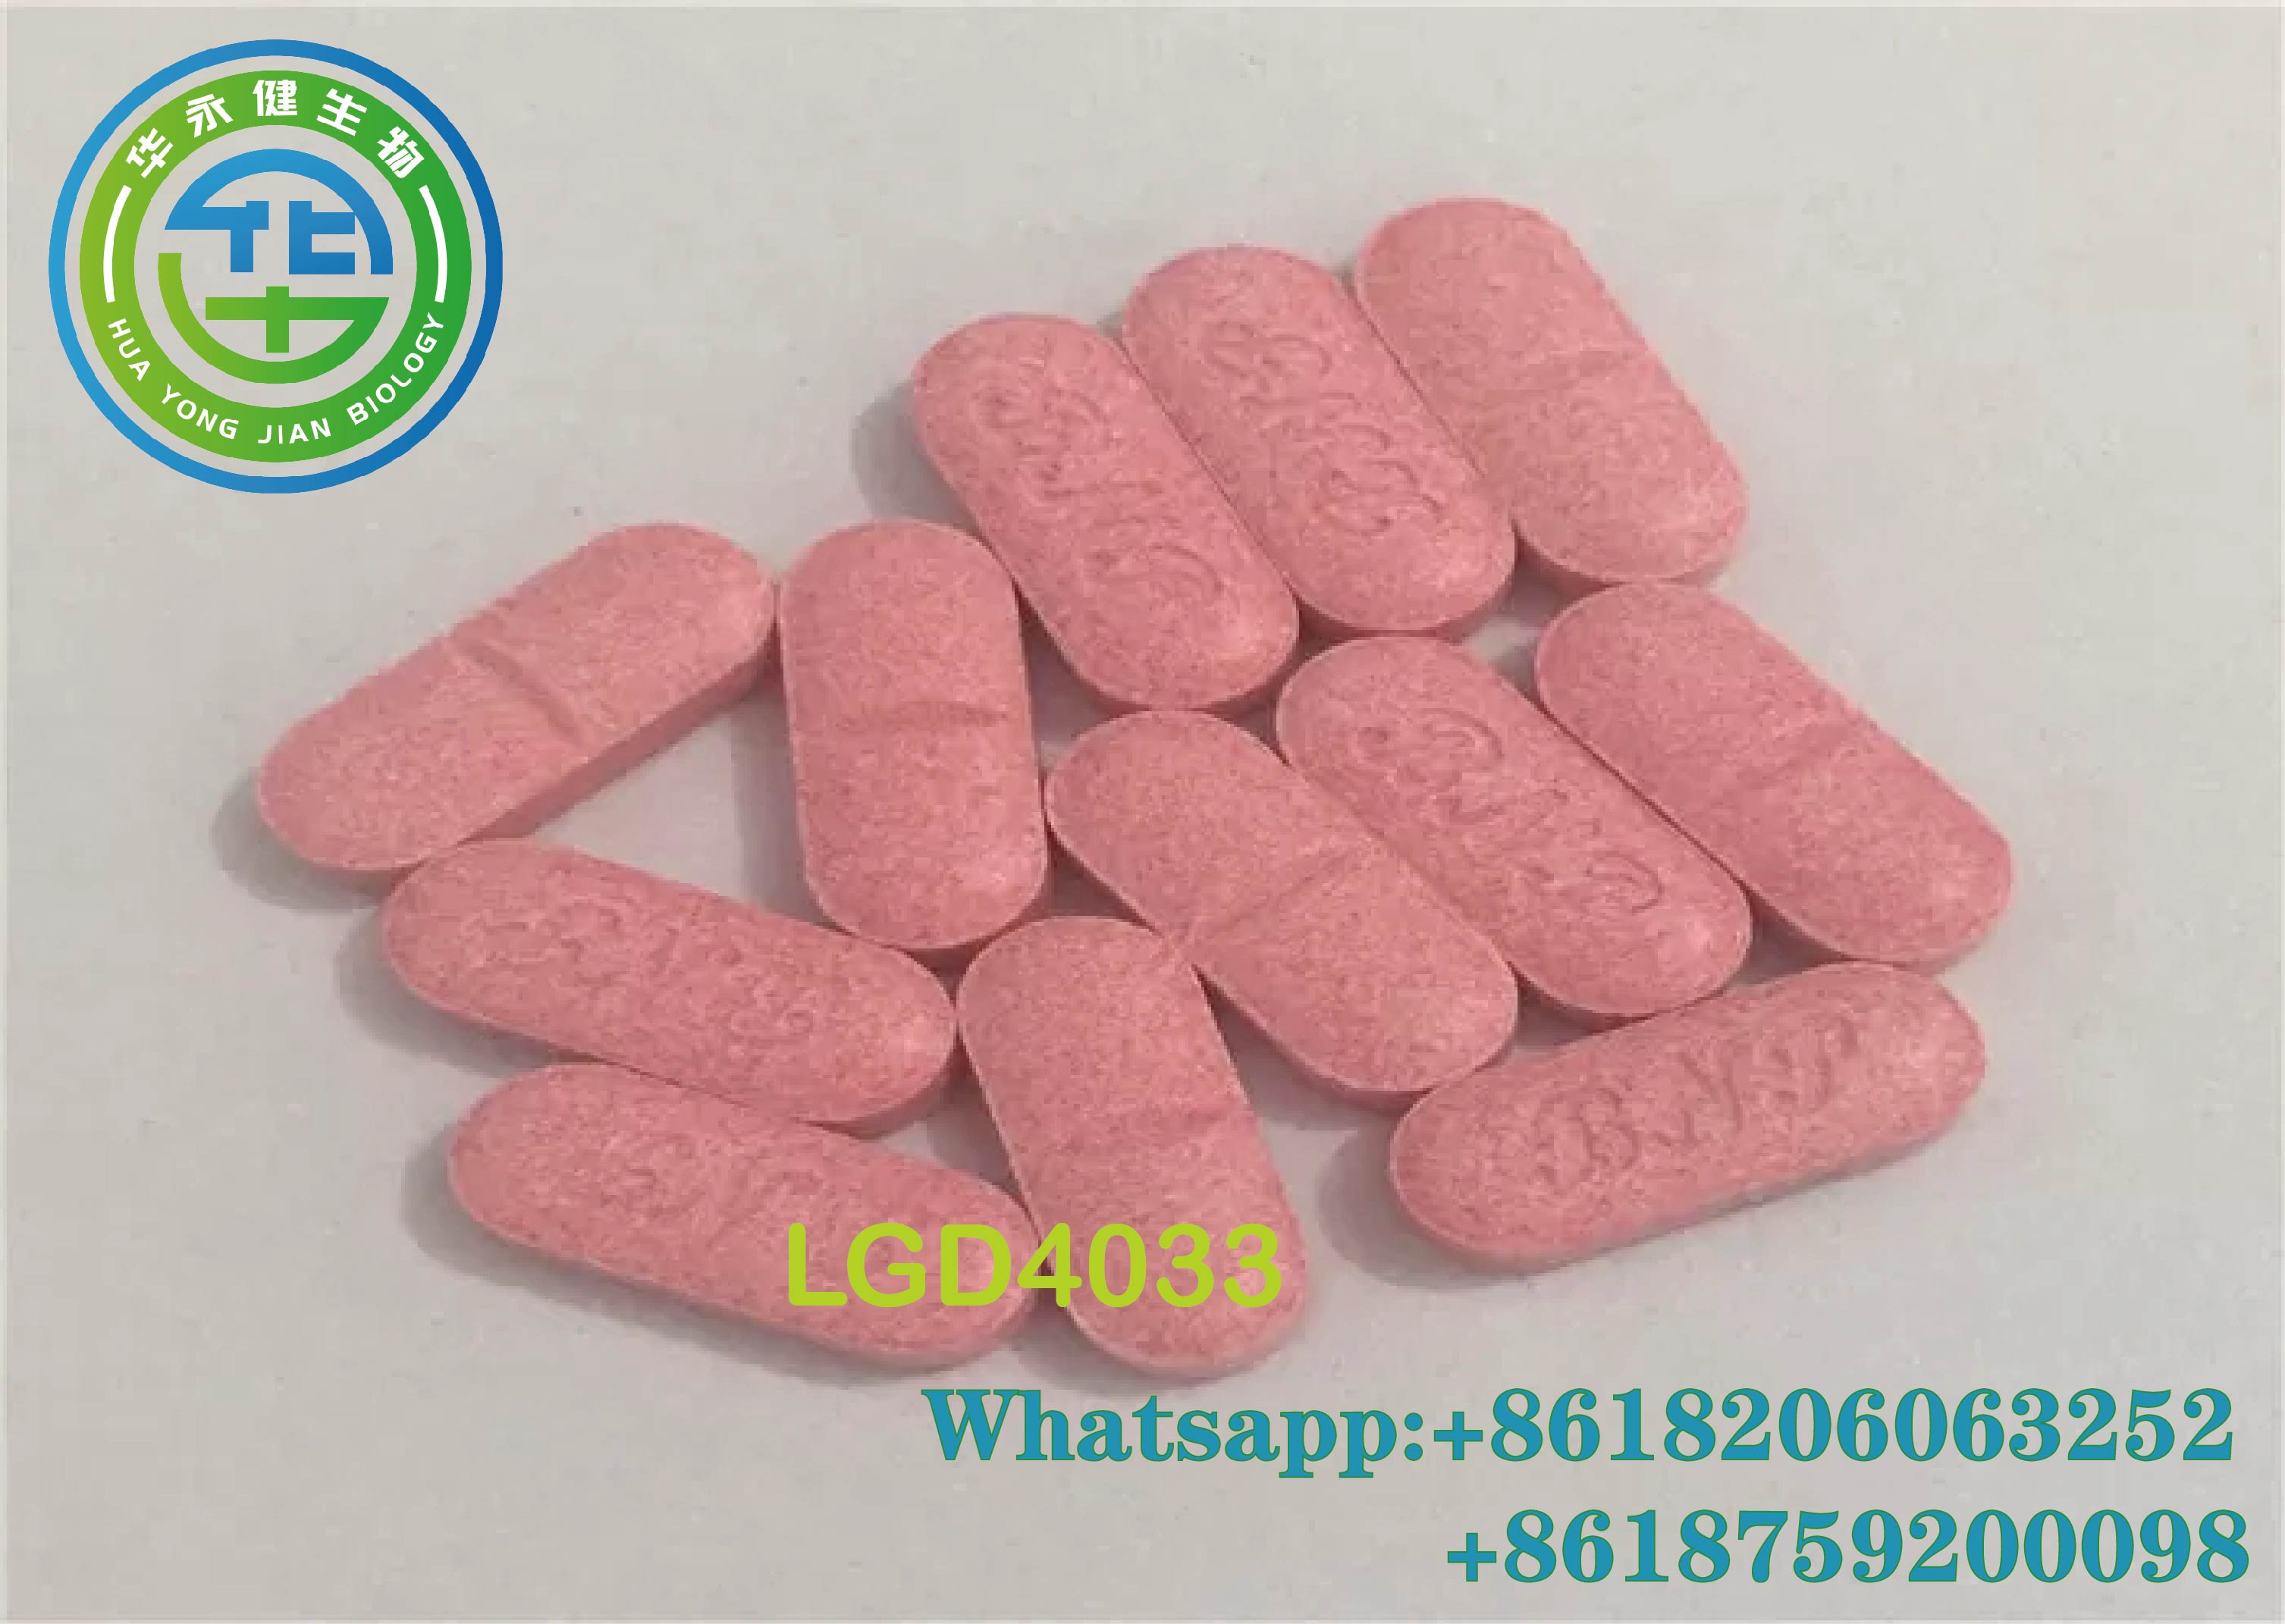 Ligandrol 10mg Sarms LGD-4033 100pills/bottle Raw Steroid Powders For Bulking Recomposition Strength Gaining